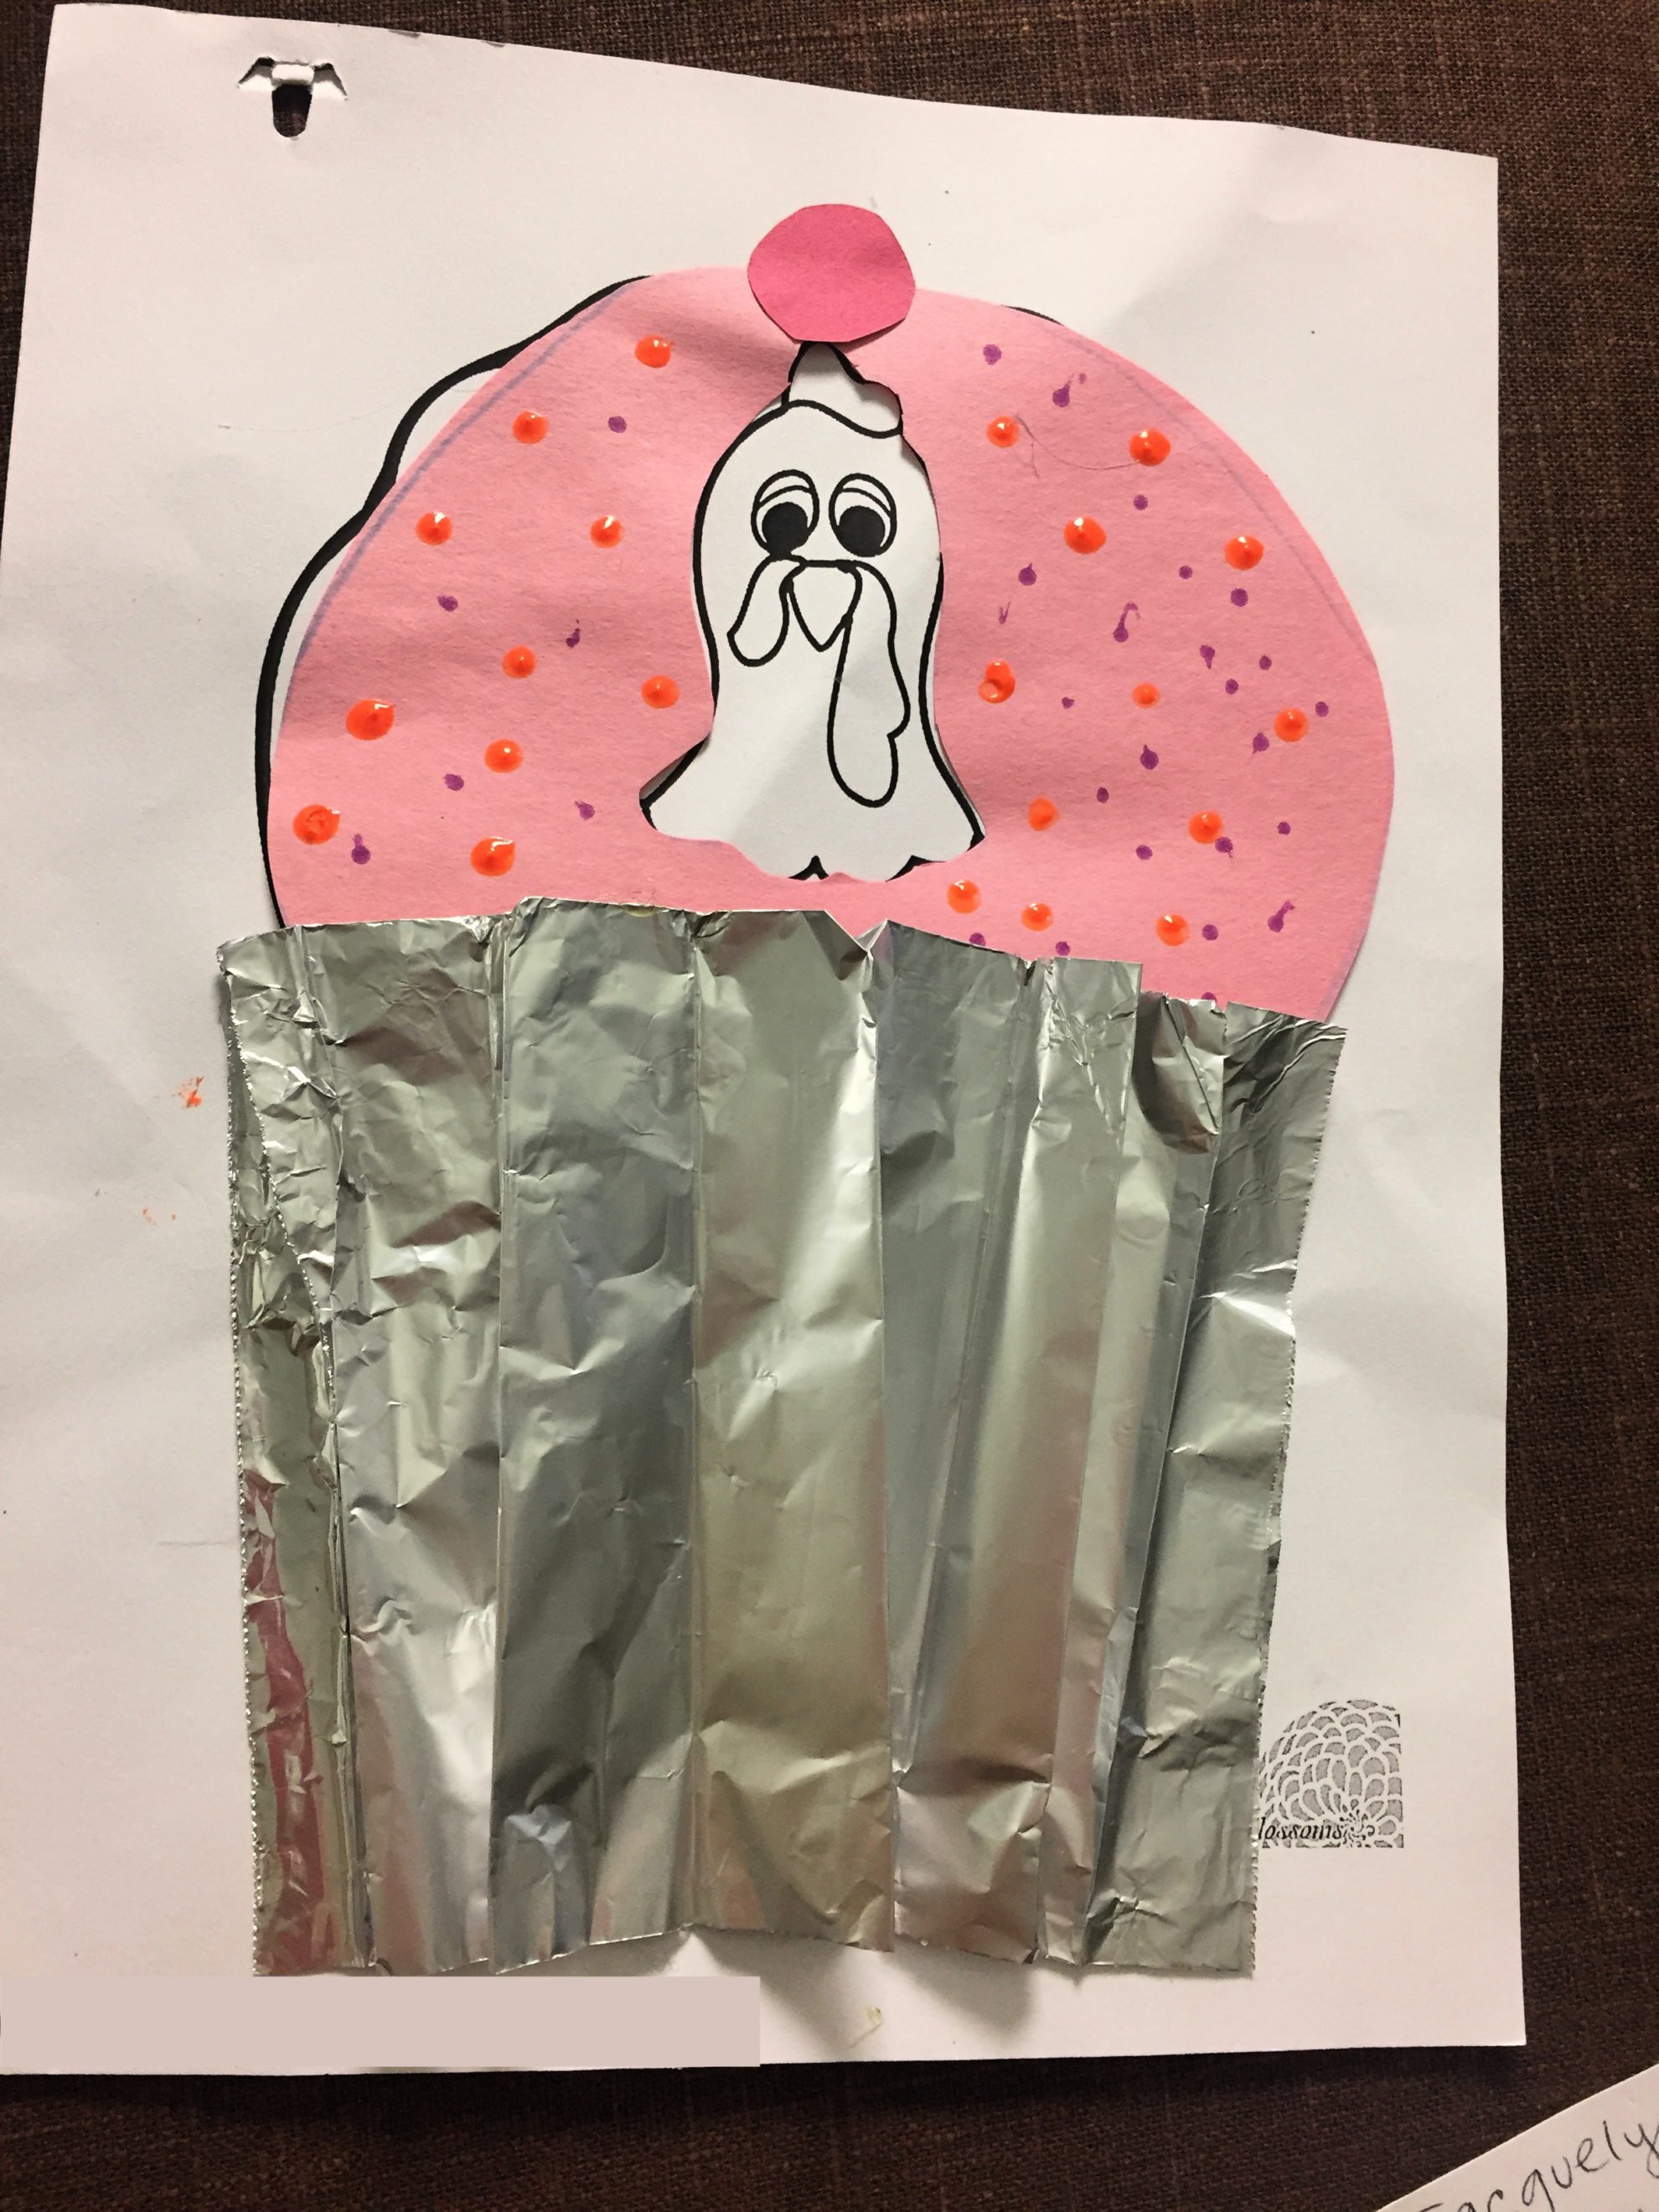 Paper Turkey In Disguise dressed as a Cupcake with tinfoil wrapper and pink construction paper with little dots as sprinkles.